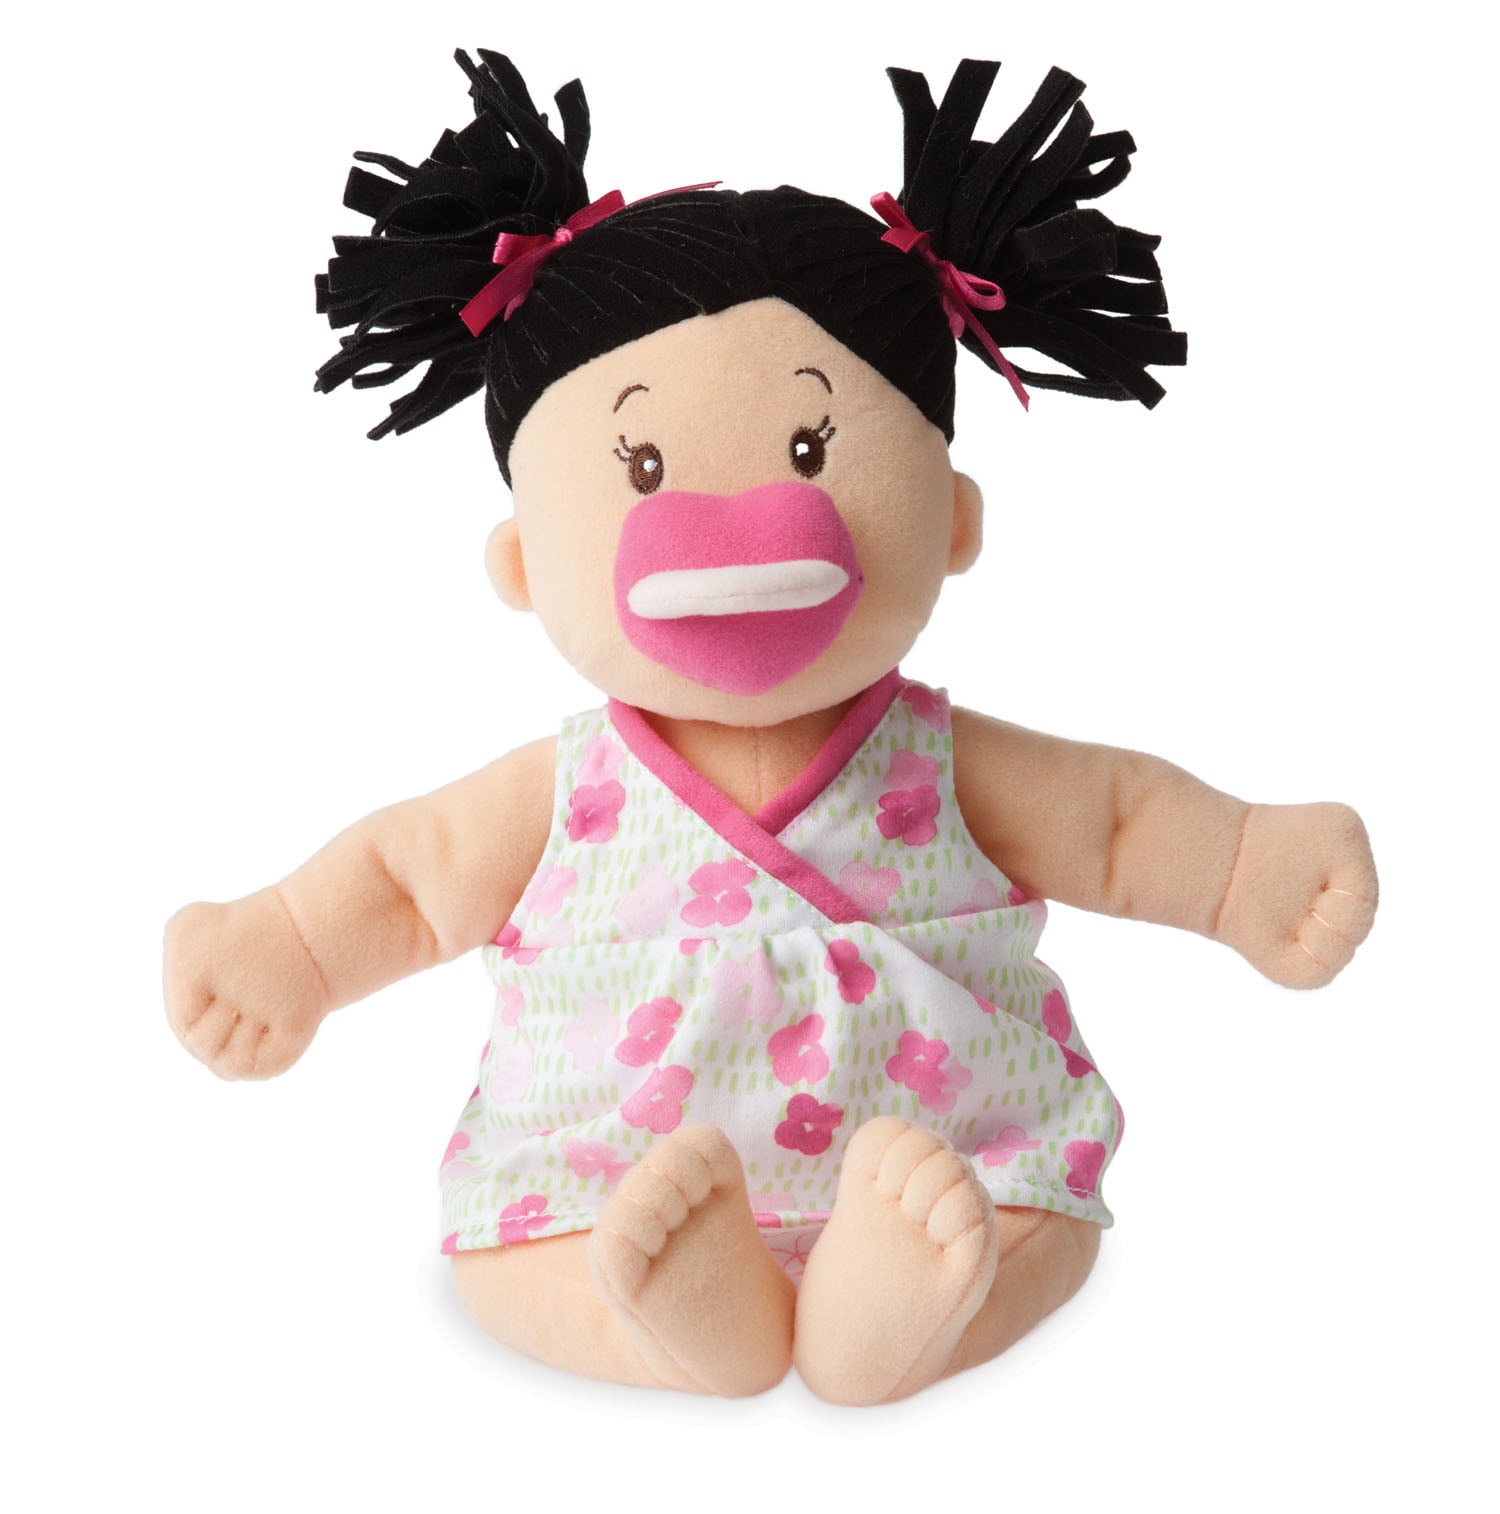 Toy Baby Stella Blonde Soft First Ages 1 Year and Up, 15" - Walmart.com